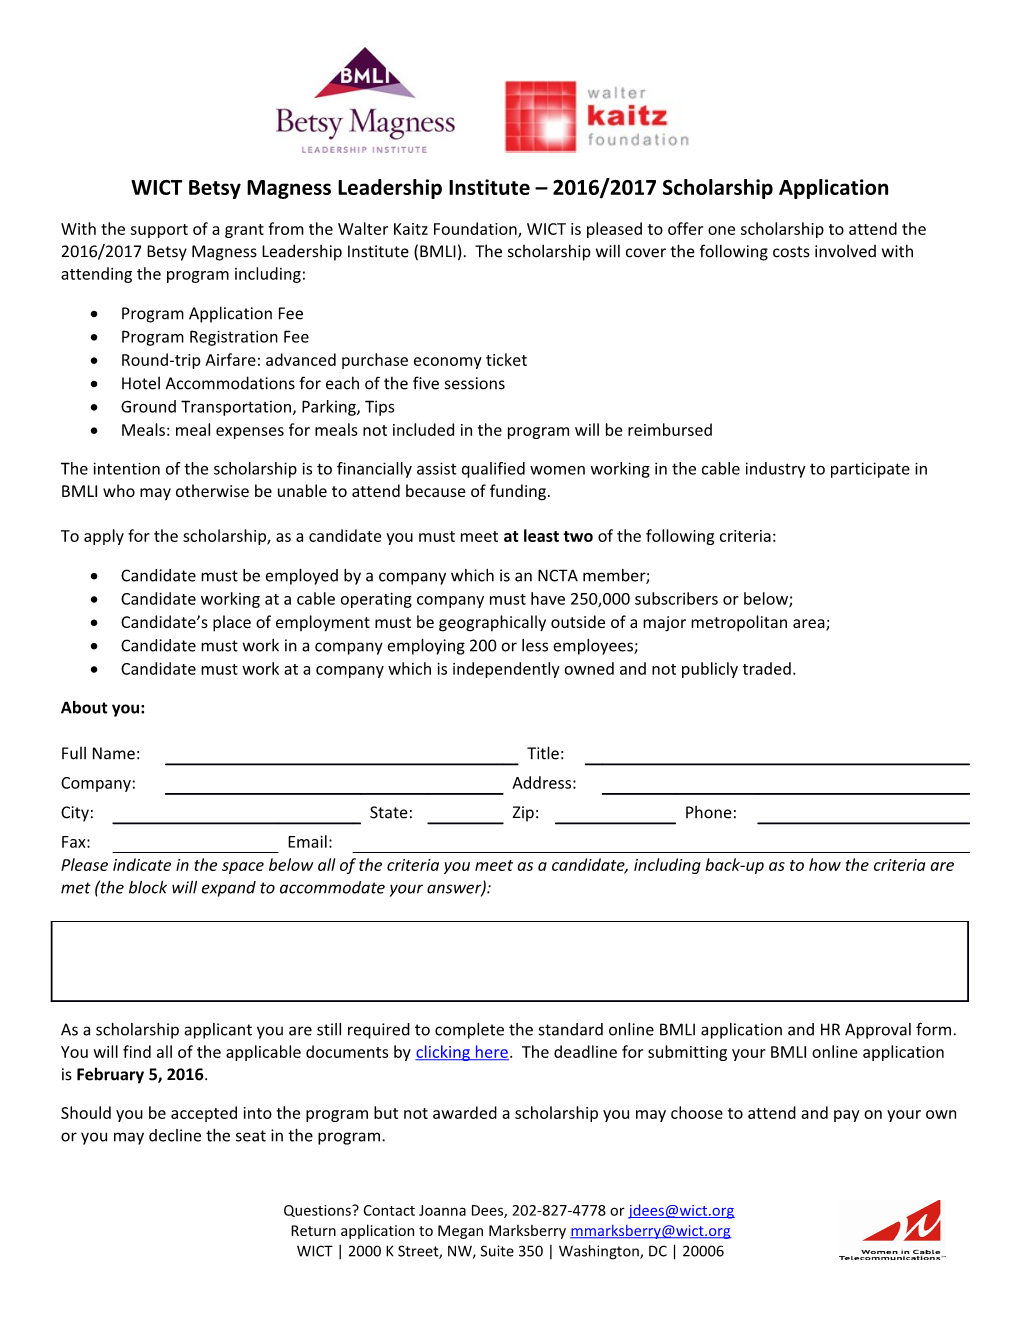 WICT Betsy Magness Leadership Institute 2016/2017 Scholarship Application